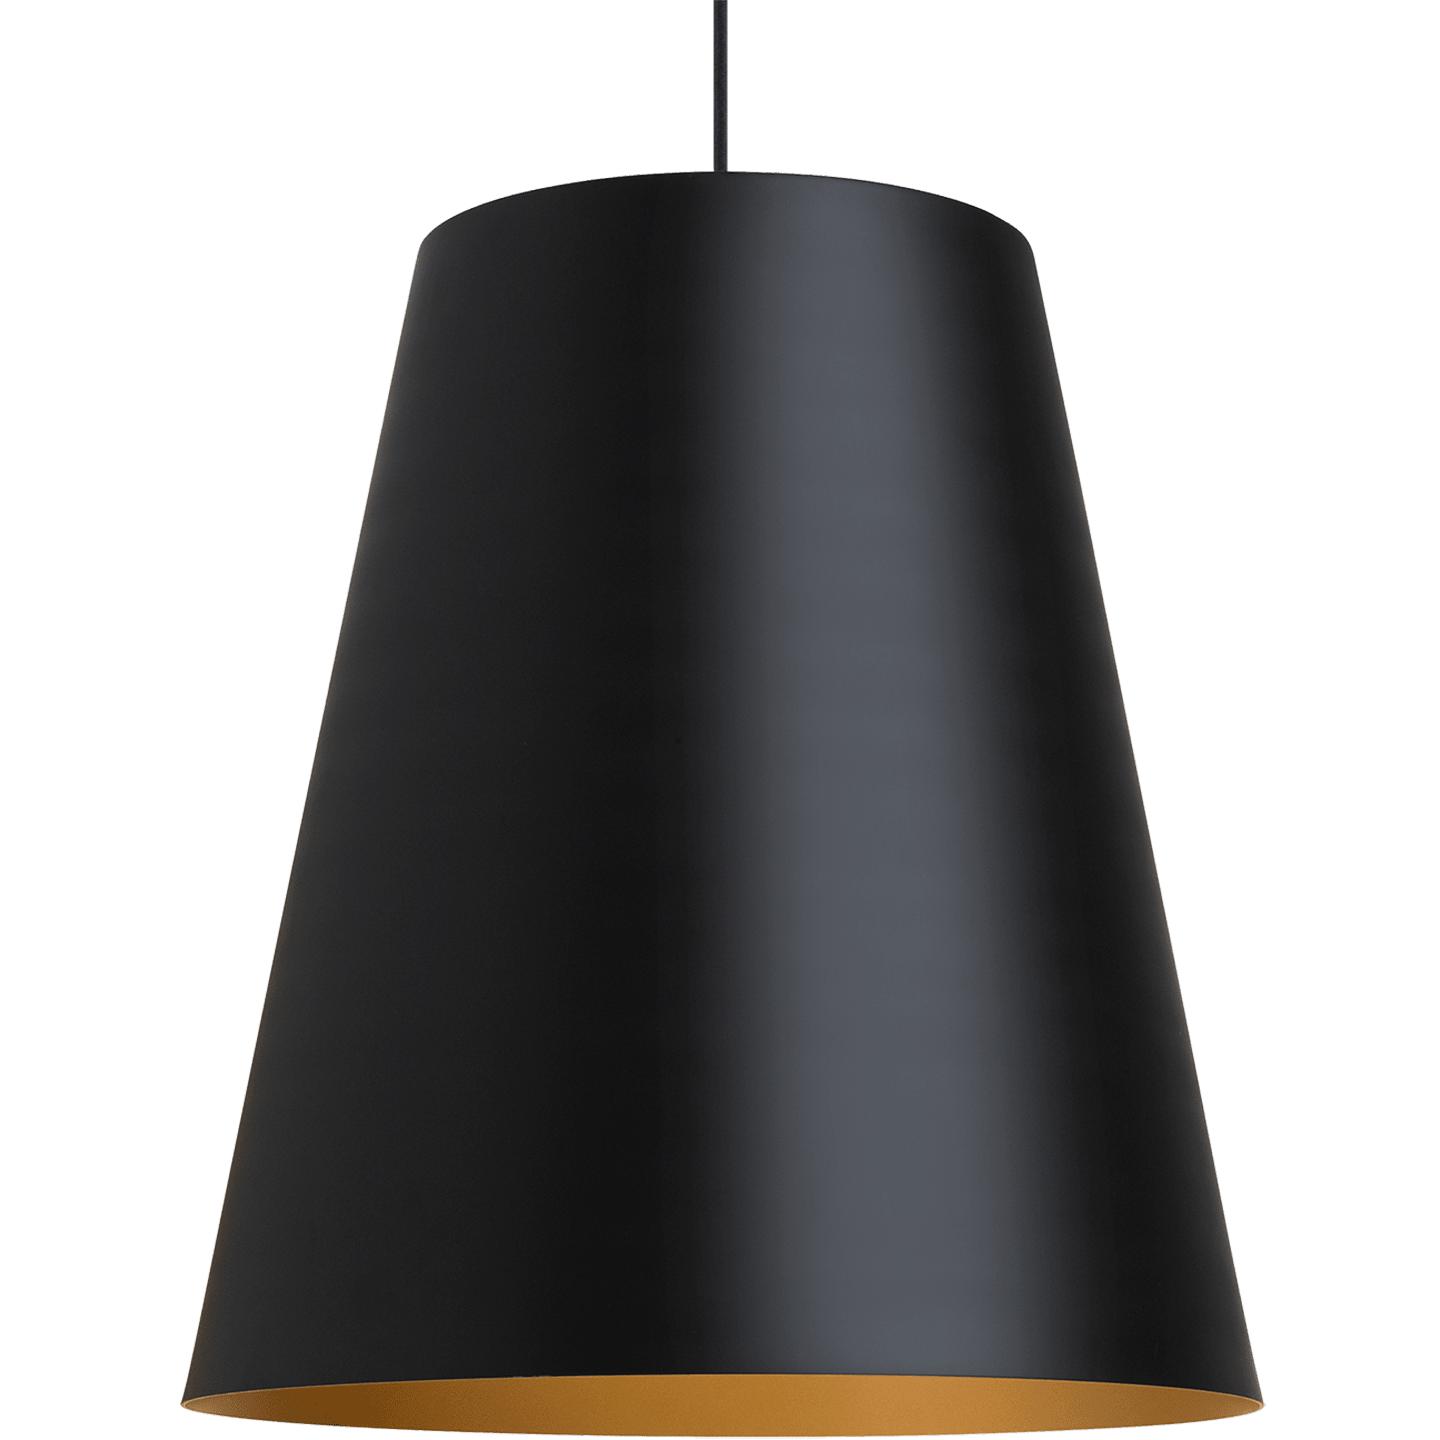 Black/Satin Gold Lamp Not Included